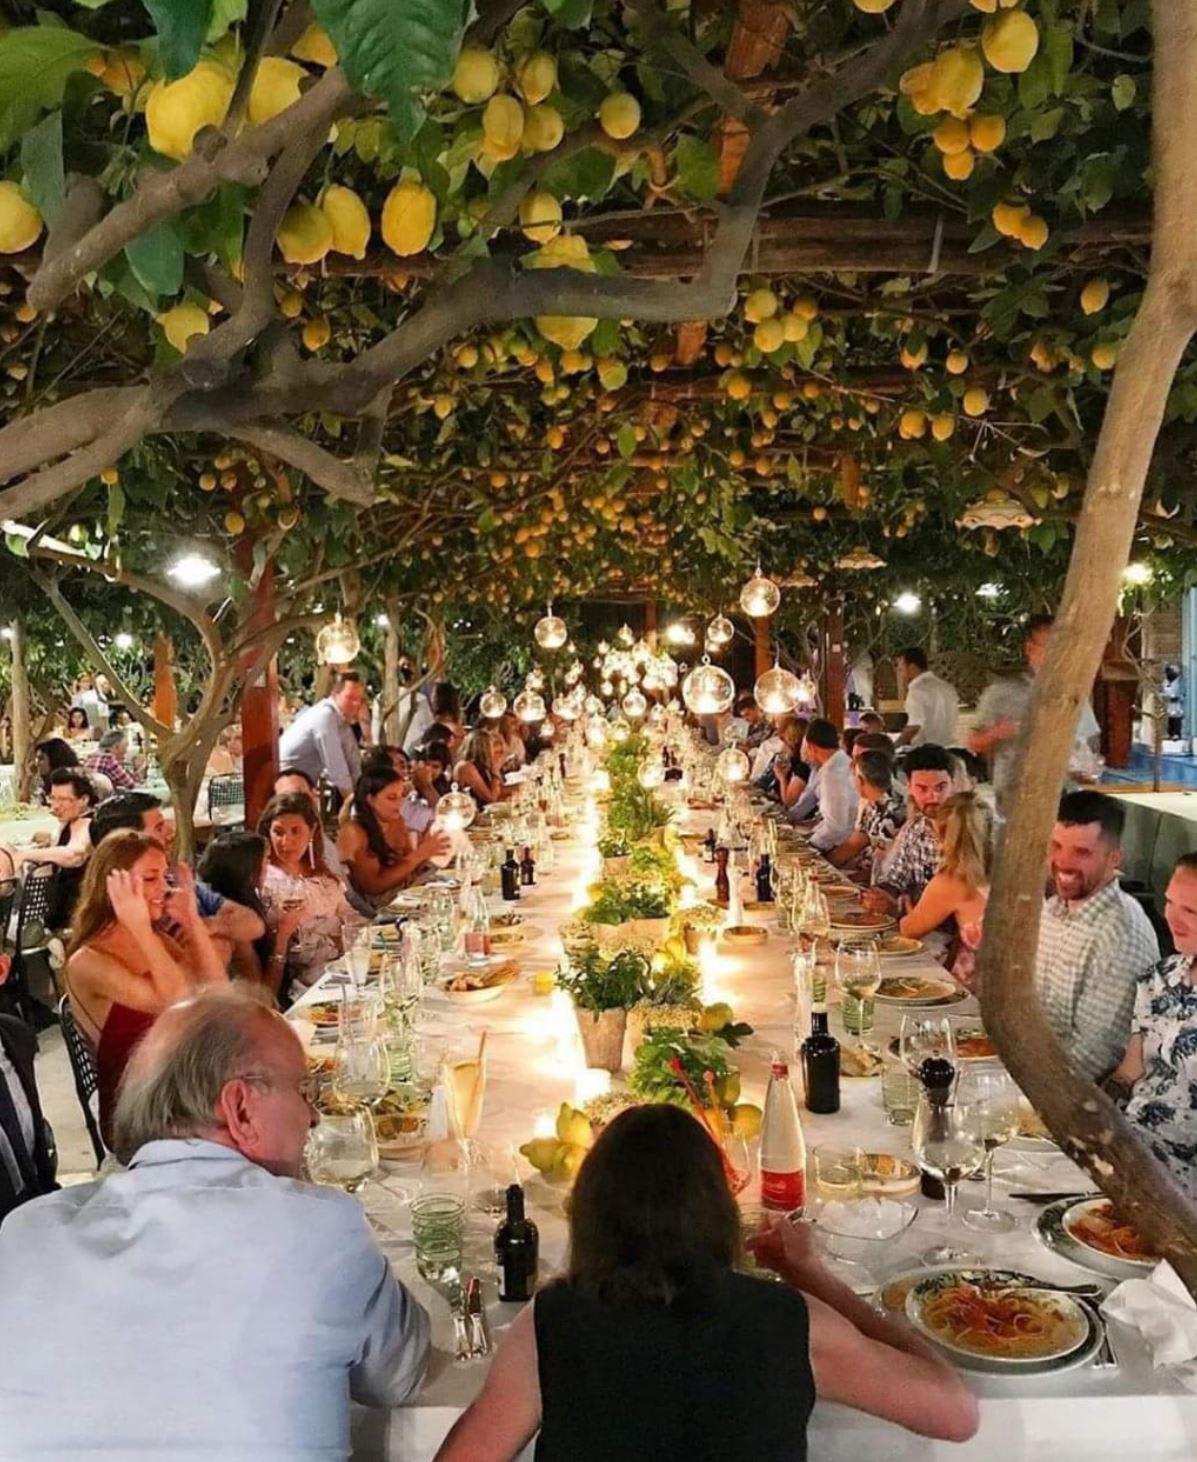 An outdoor restaurant in Italy, covered by lemon plants and lemon